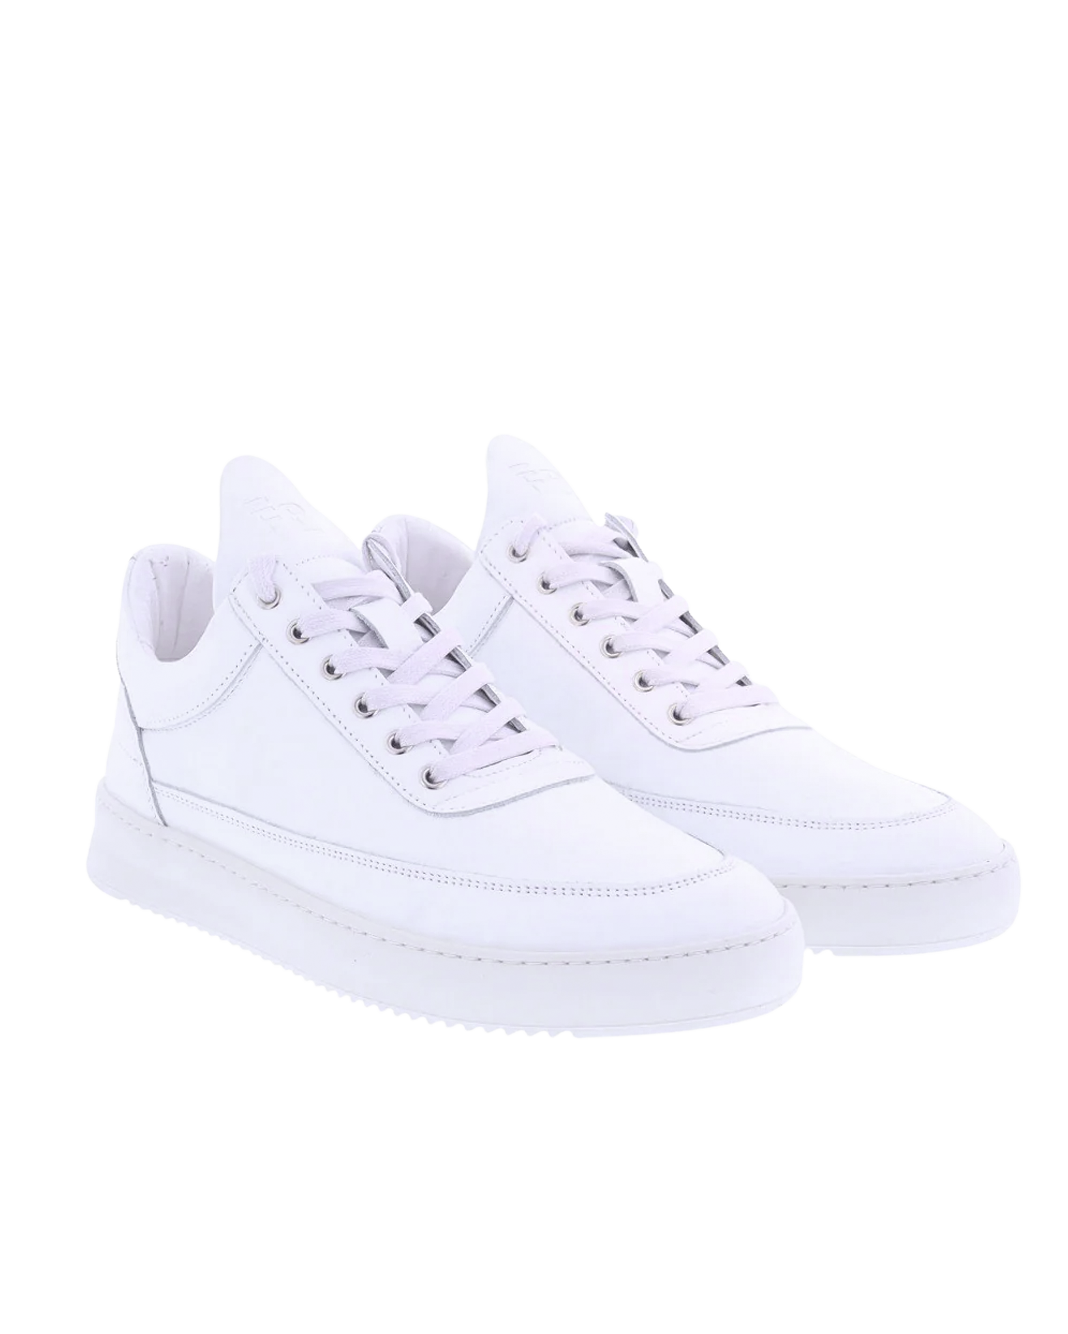 Men Low top ripple leather white